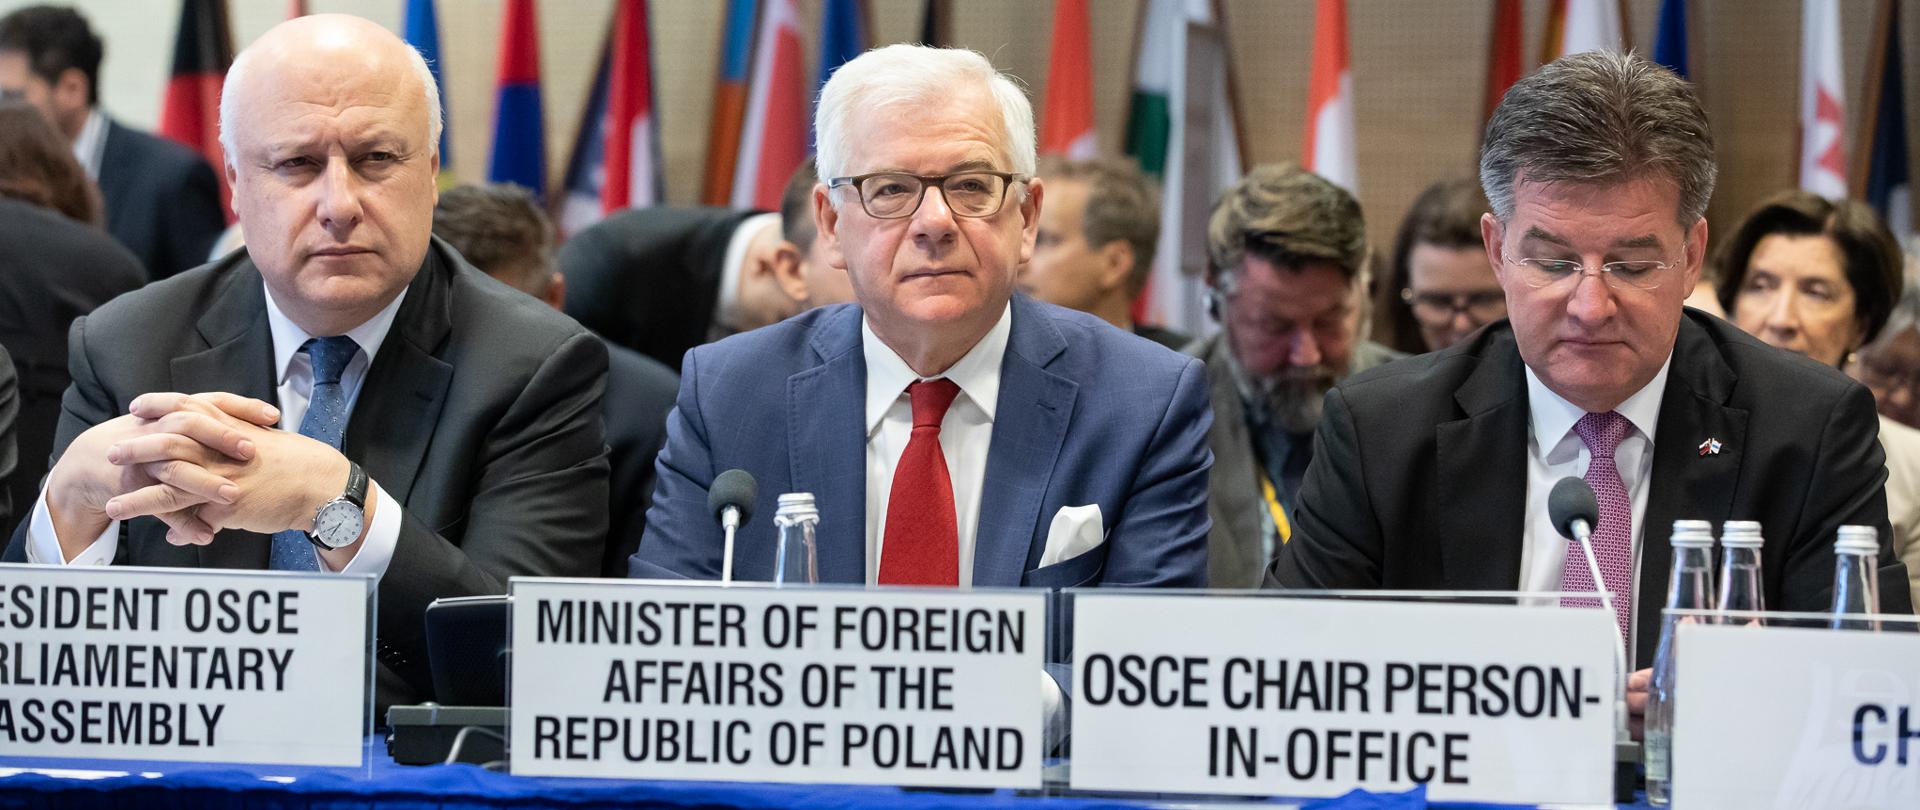 Minister Jacek Czaputowicz attends OSCE Human Dimension Implementation Meeting in Warsaw